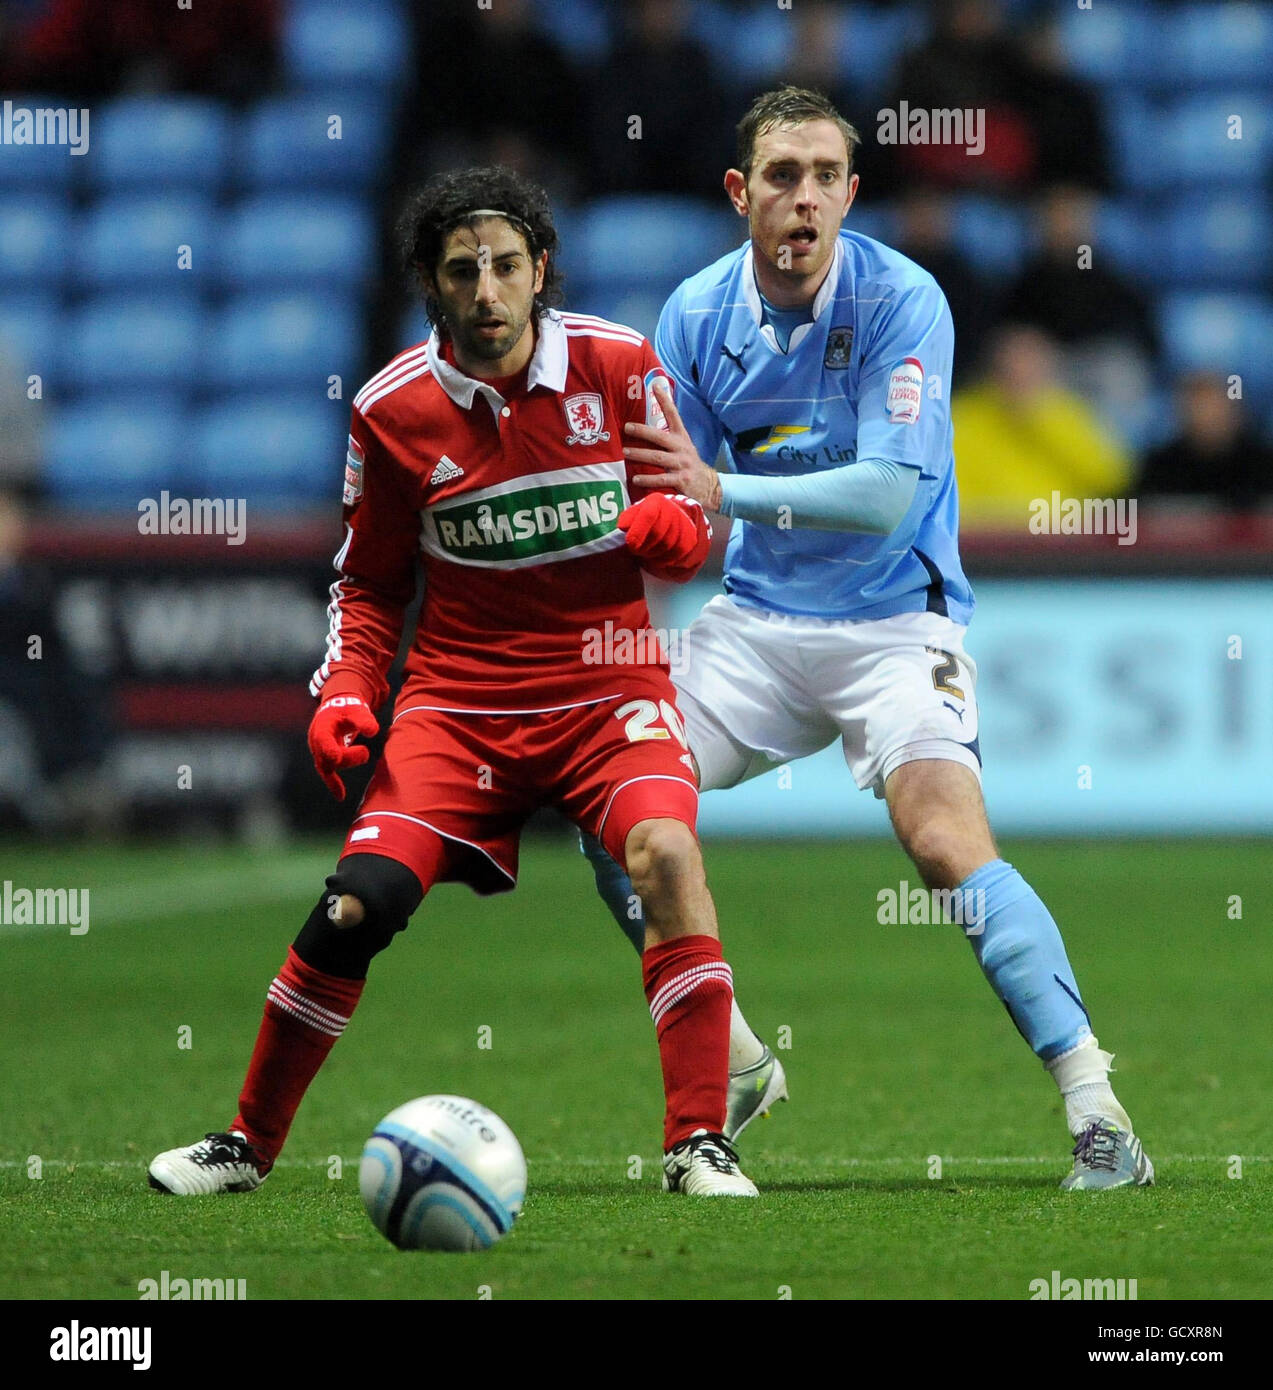 Middlesbrough's Julio Arca and Covetry's Richard Keogh battle for the ball during the npower Football League Championship match at the Ricoh Arena, Coventry. Stock Photo